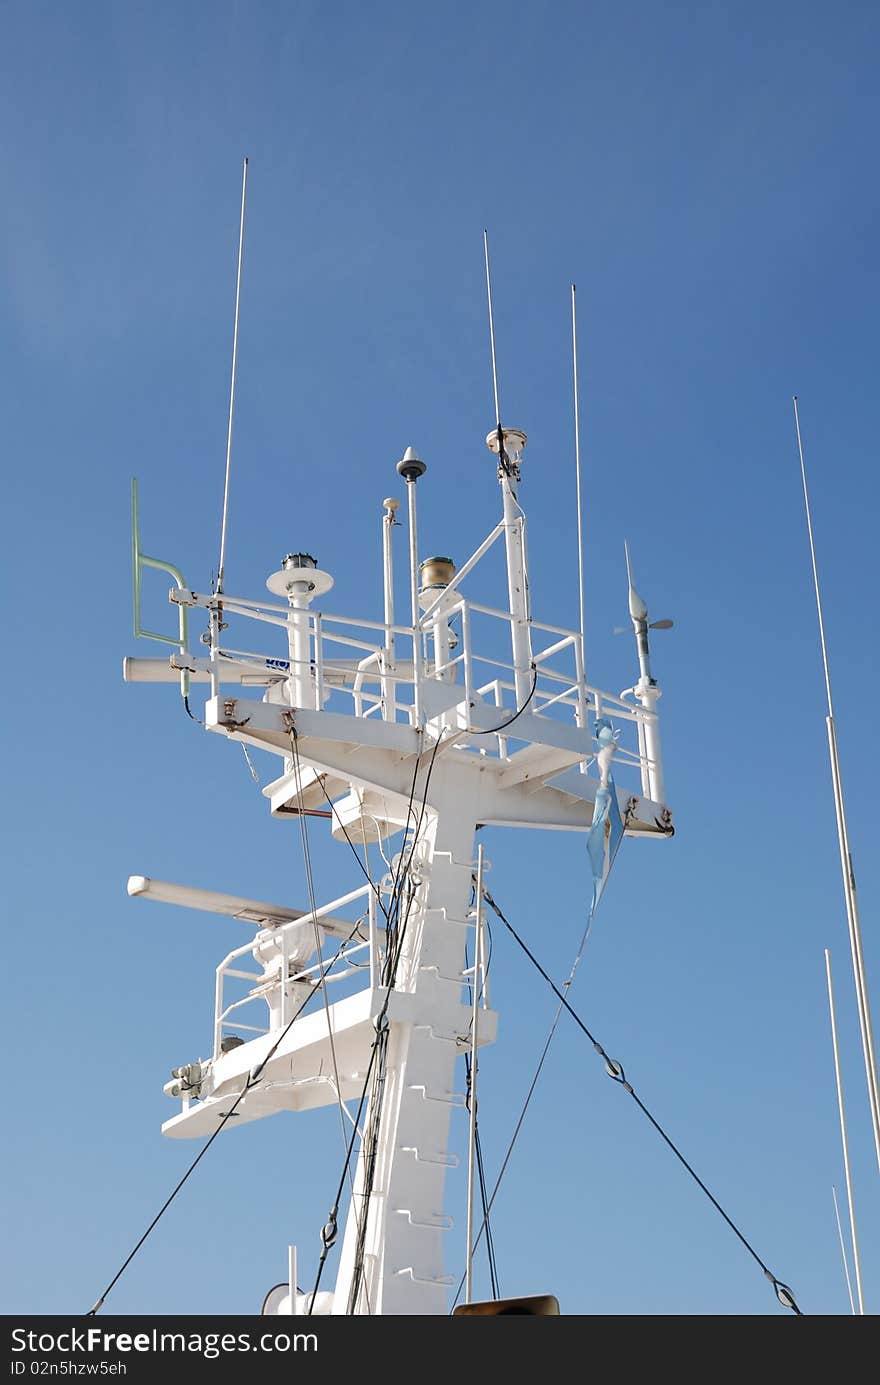 Ship's navigation instruments mounted on top of iron tower. Ship's navigation instruments mounted on top of iron tower